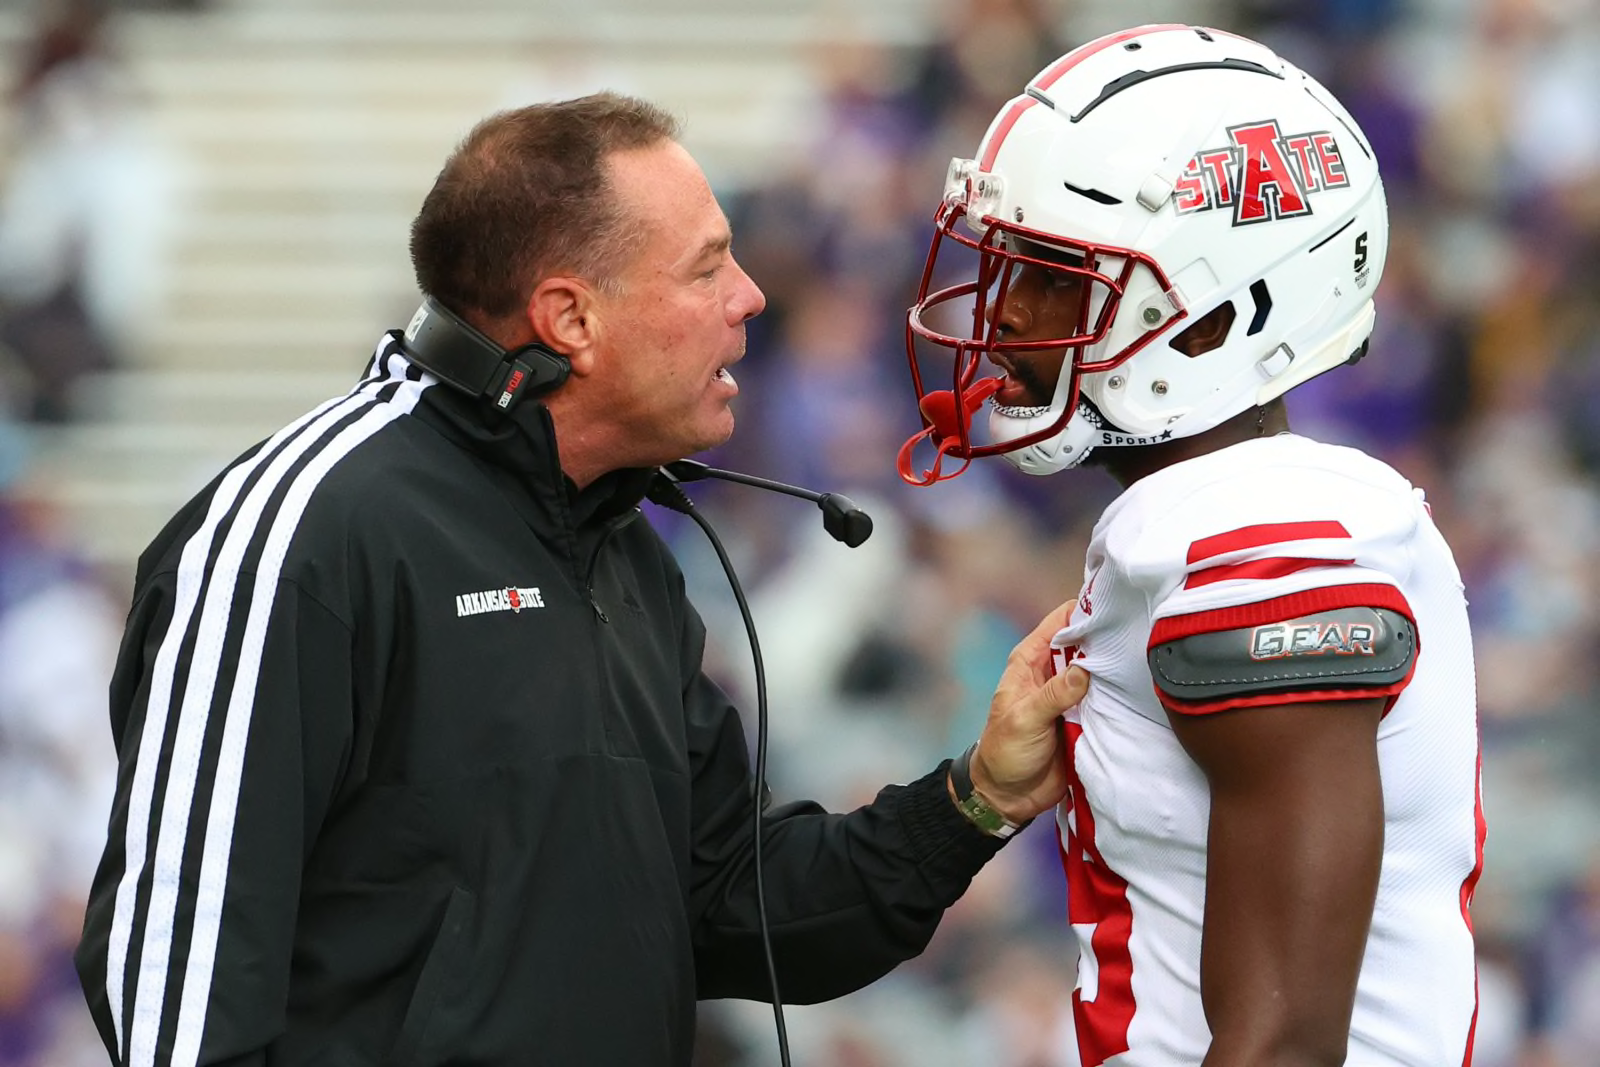 Does Arkansas State football need more time to grow? - Page 4